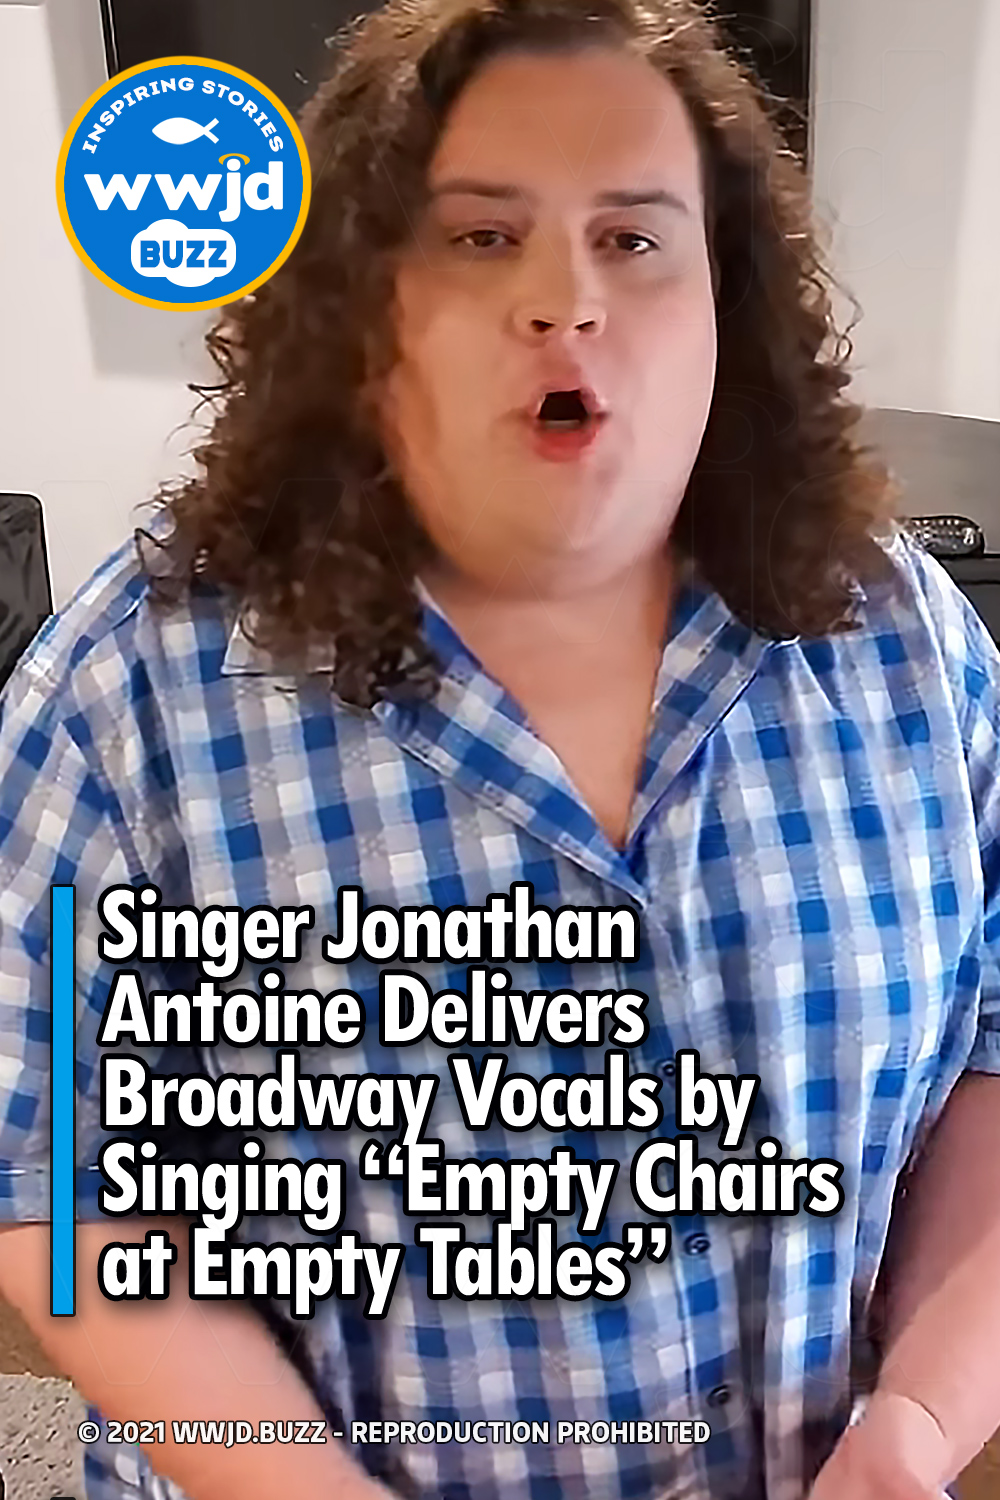 Singer Jonathan Antoine Delivers Broadway Vocals by Singing “Empty Chairs at Empty Tables”